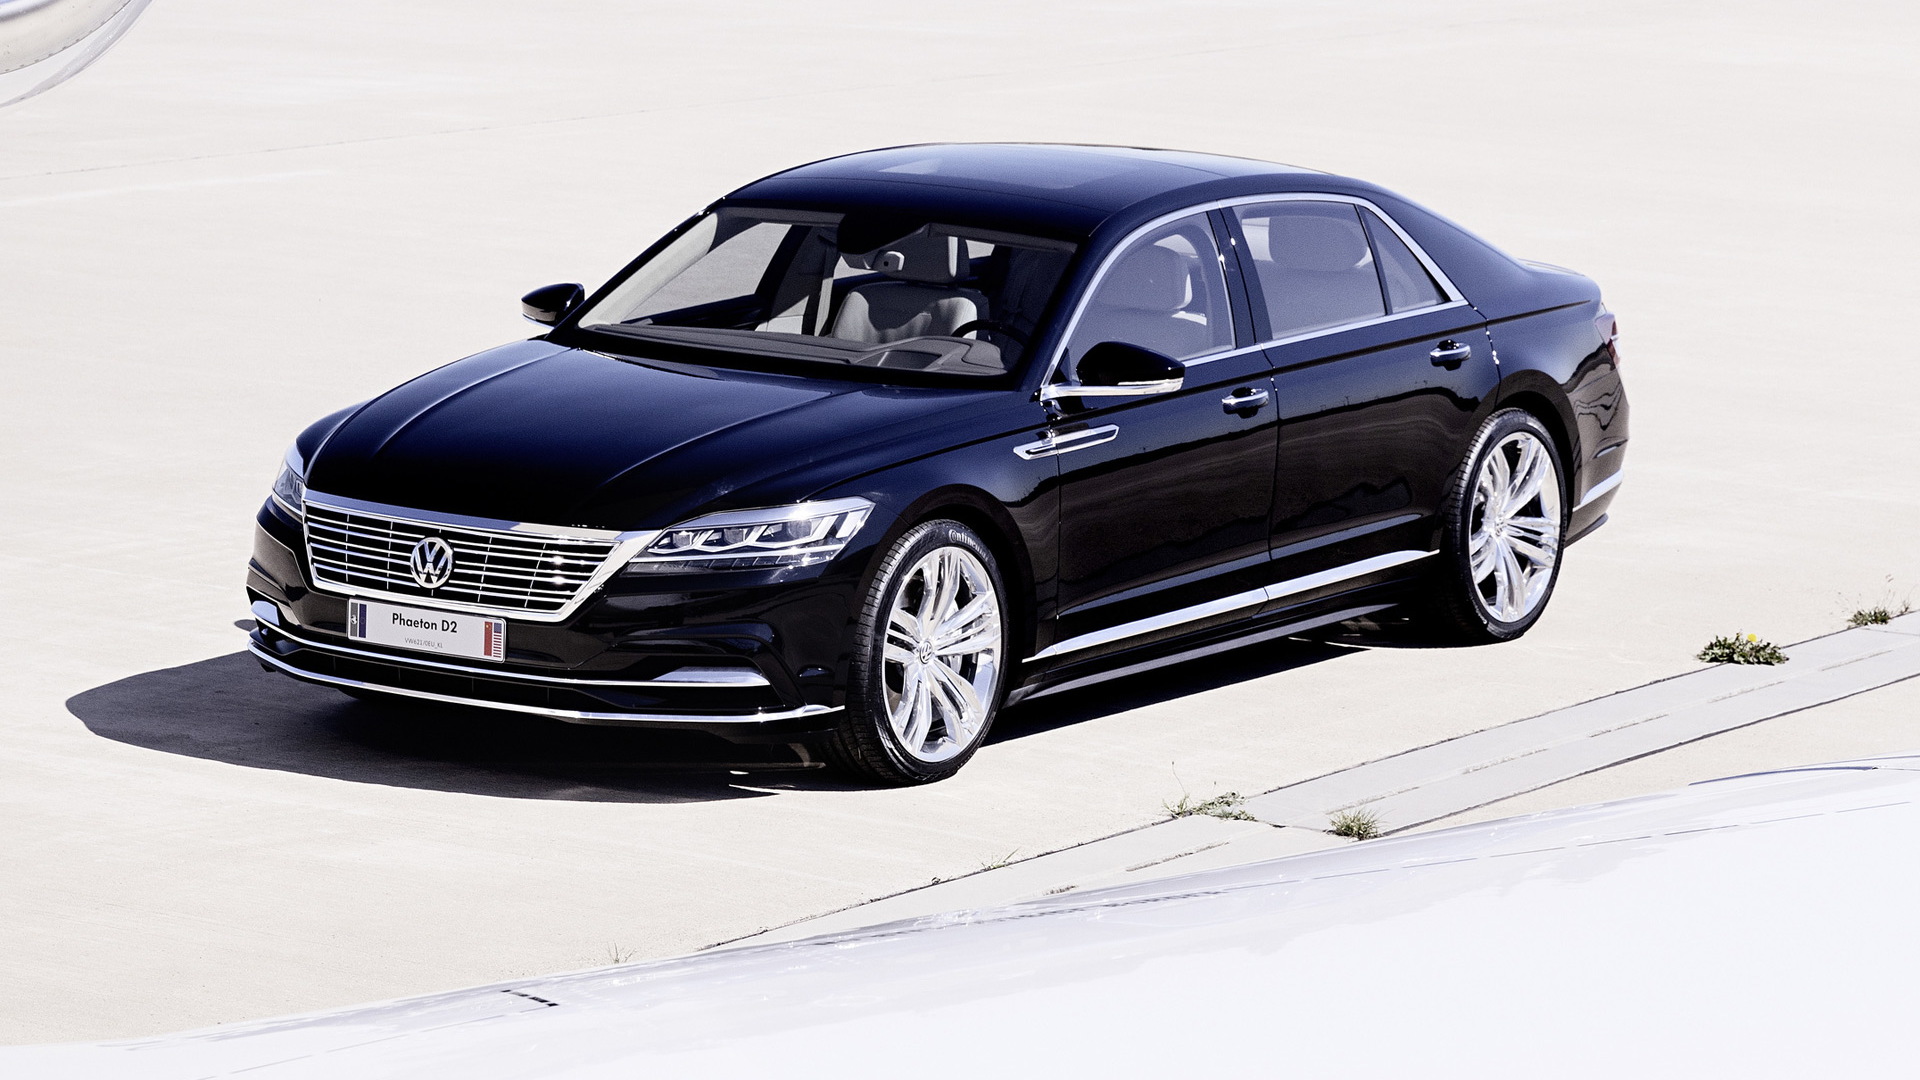 Second-generation Volkswagen Phaeton that never made production